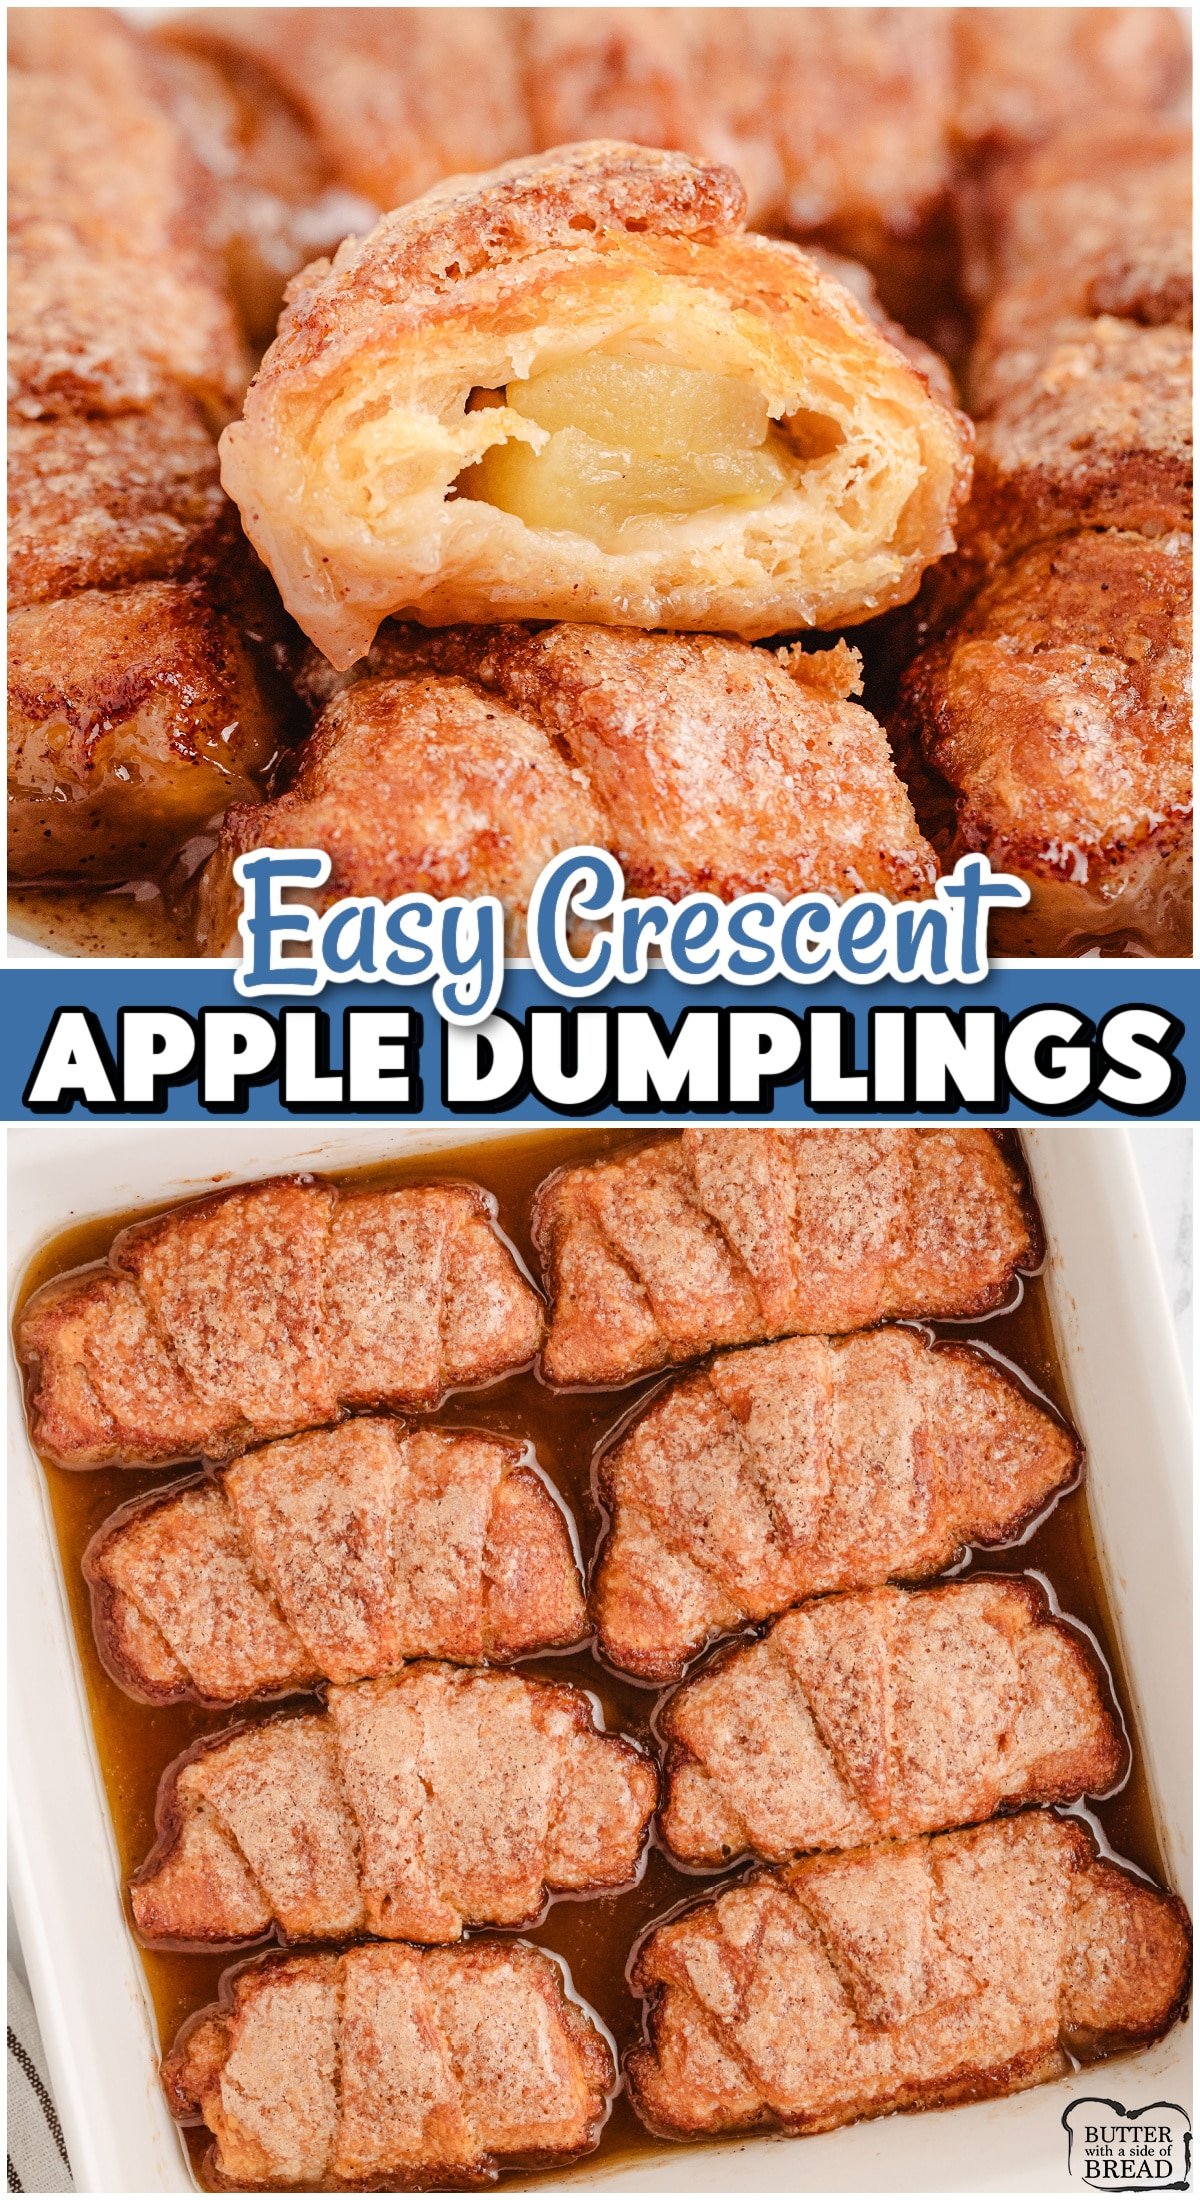 Easy Apple Dumplings recipe made with just a few ingredients, an apple, brown sugar, crescent dough & lemon lime soda! Simple recipe for apple dumplings in a sweet caramel-like glaze that tastes delicious.